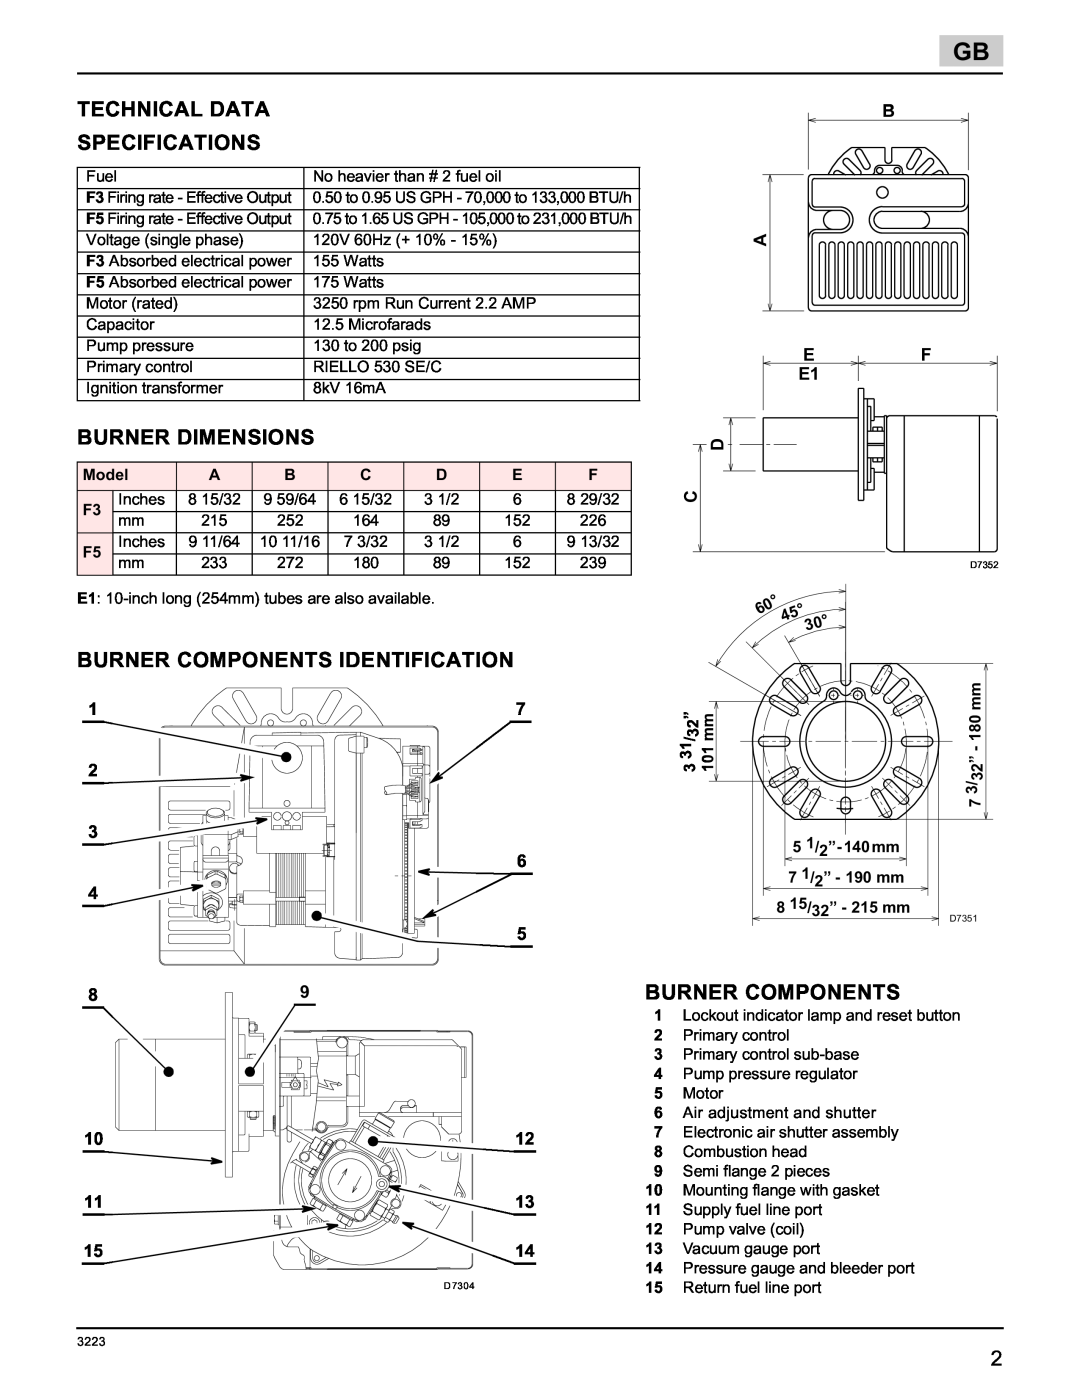 Weil-McLain 800058000-Brn-PO Rie F5 Technical Data Specifications, Burner Dimensions, Burner Components Identification 